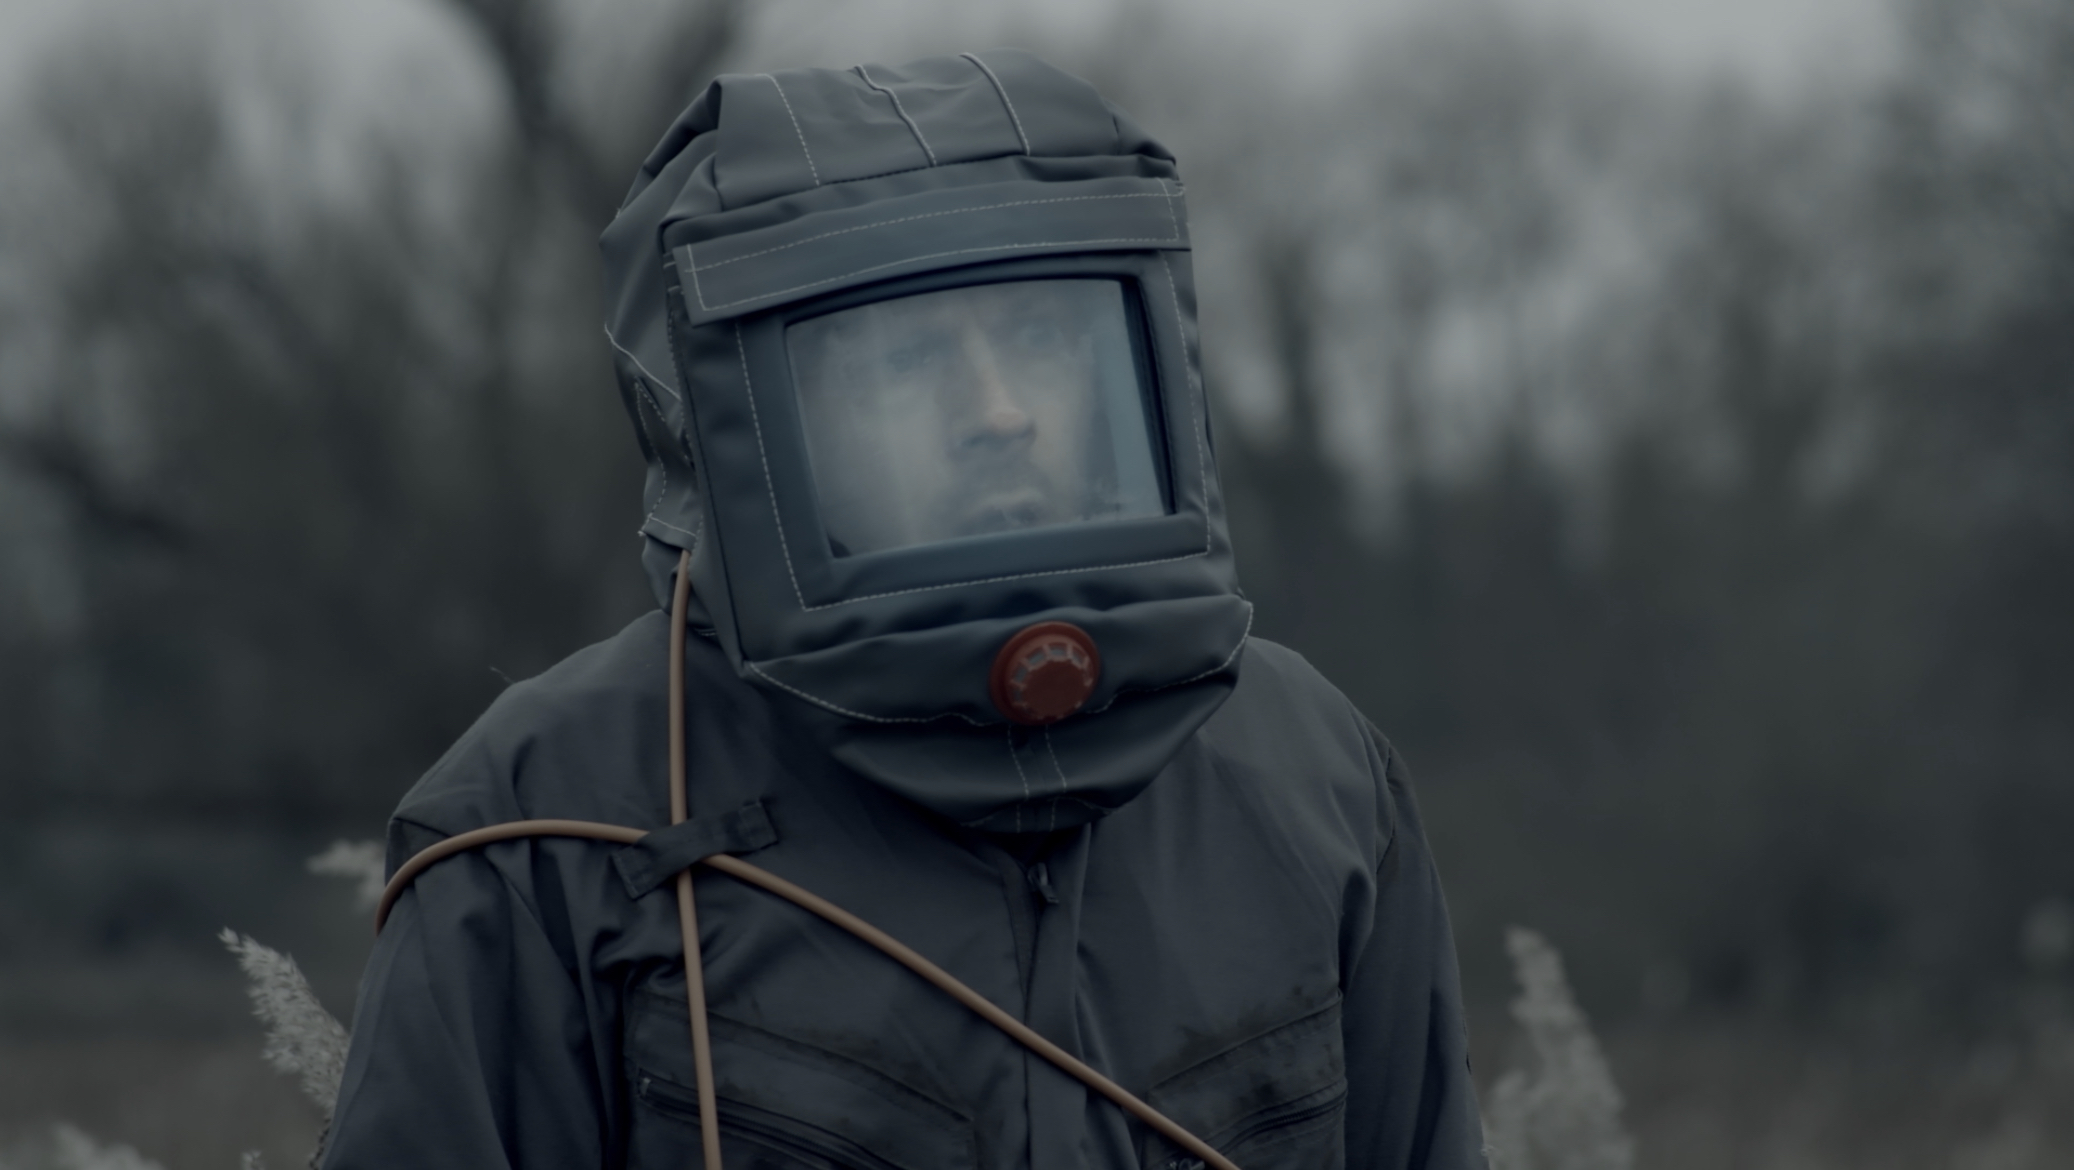 Production Design work by Isabelle Wheatland. A still image of one of her graduate films 'Alive' showing a man in a spacesuit standing in a field.